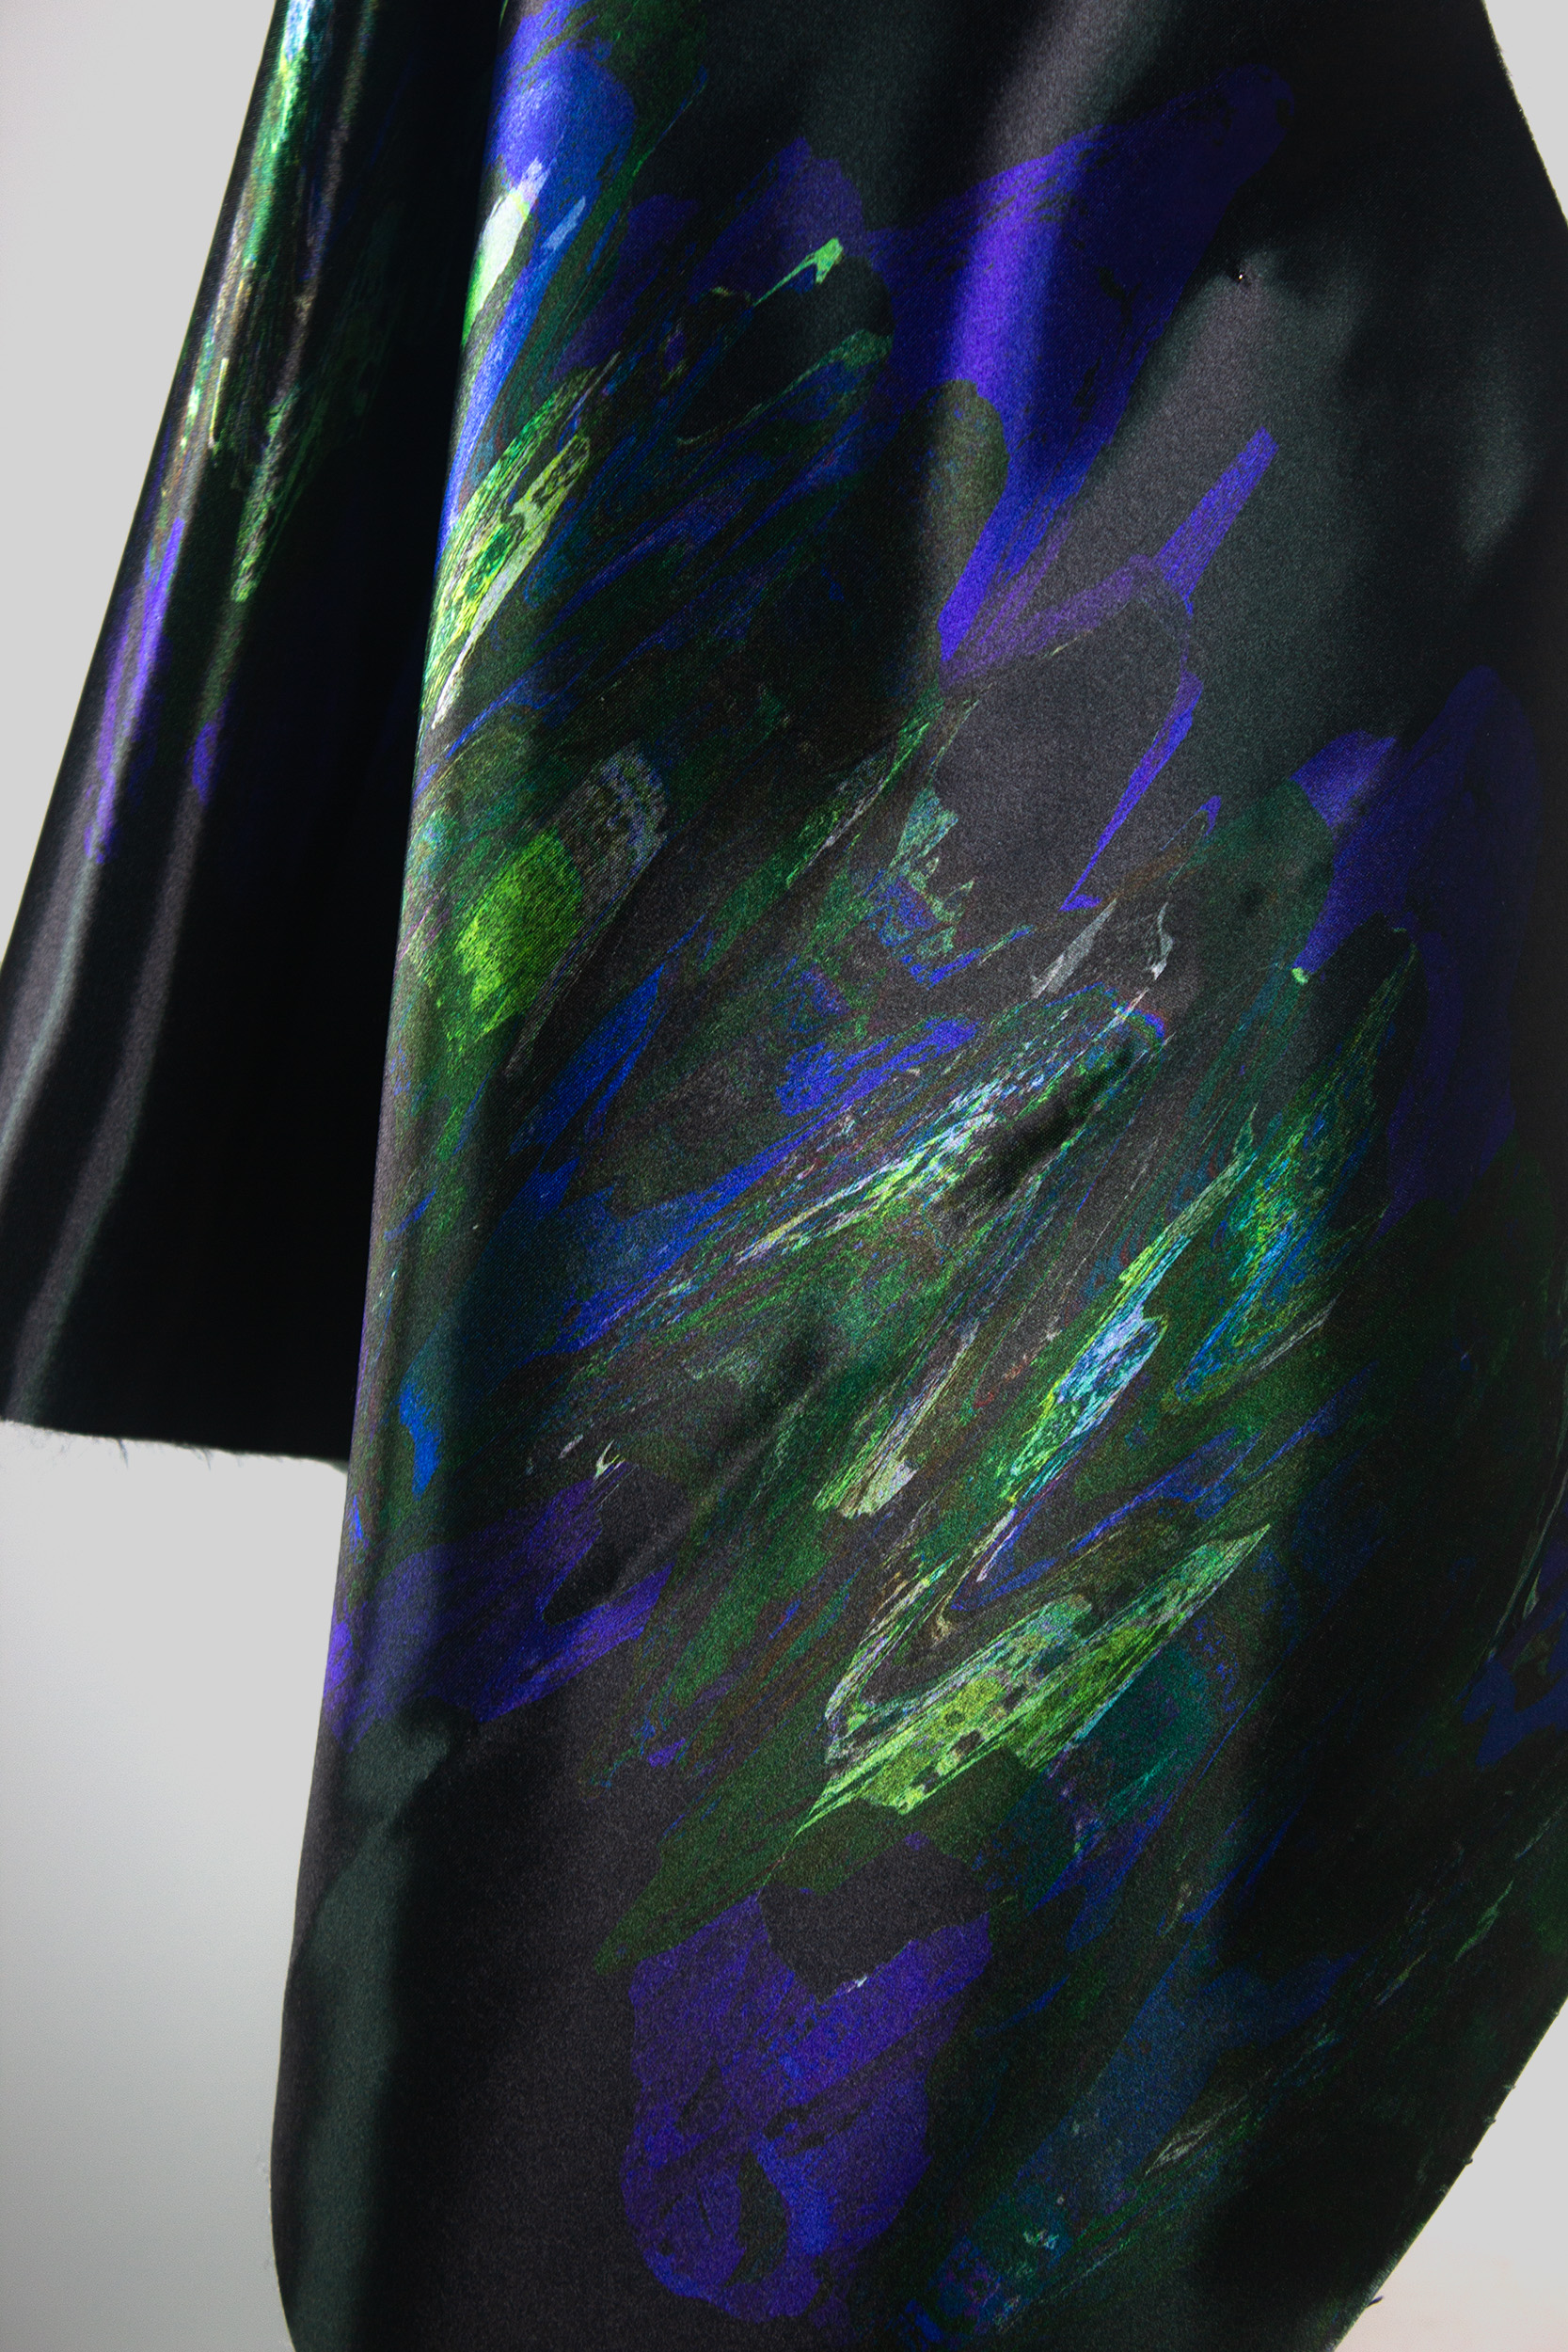 BA Textile Design work by Seren Faber showing a textured print on a highly reflective fabric.